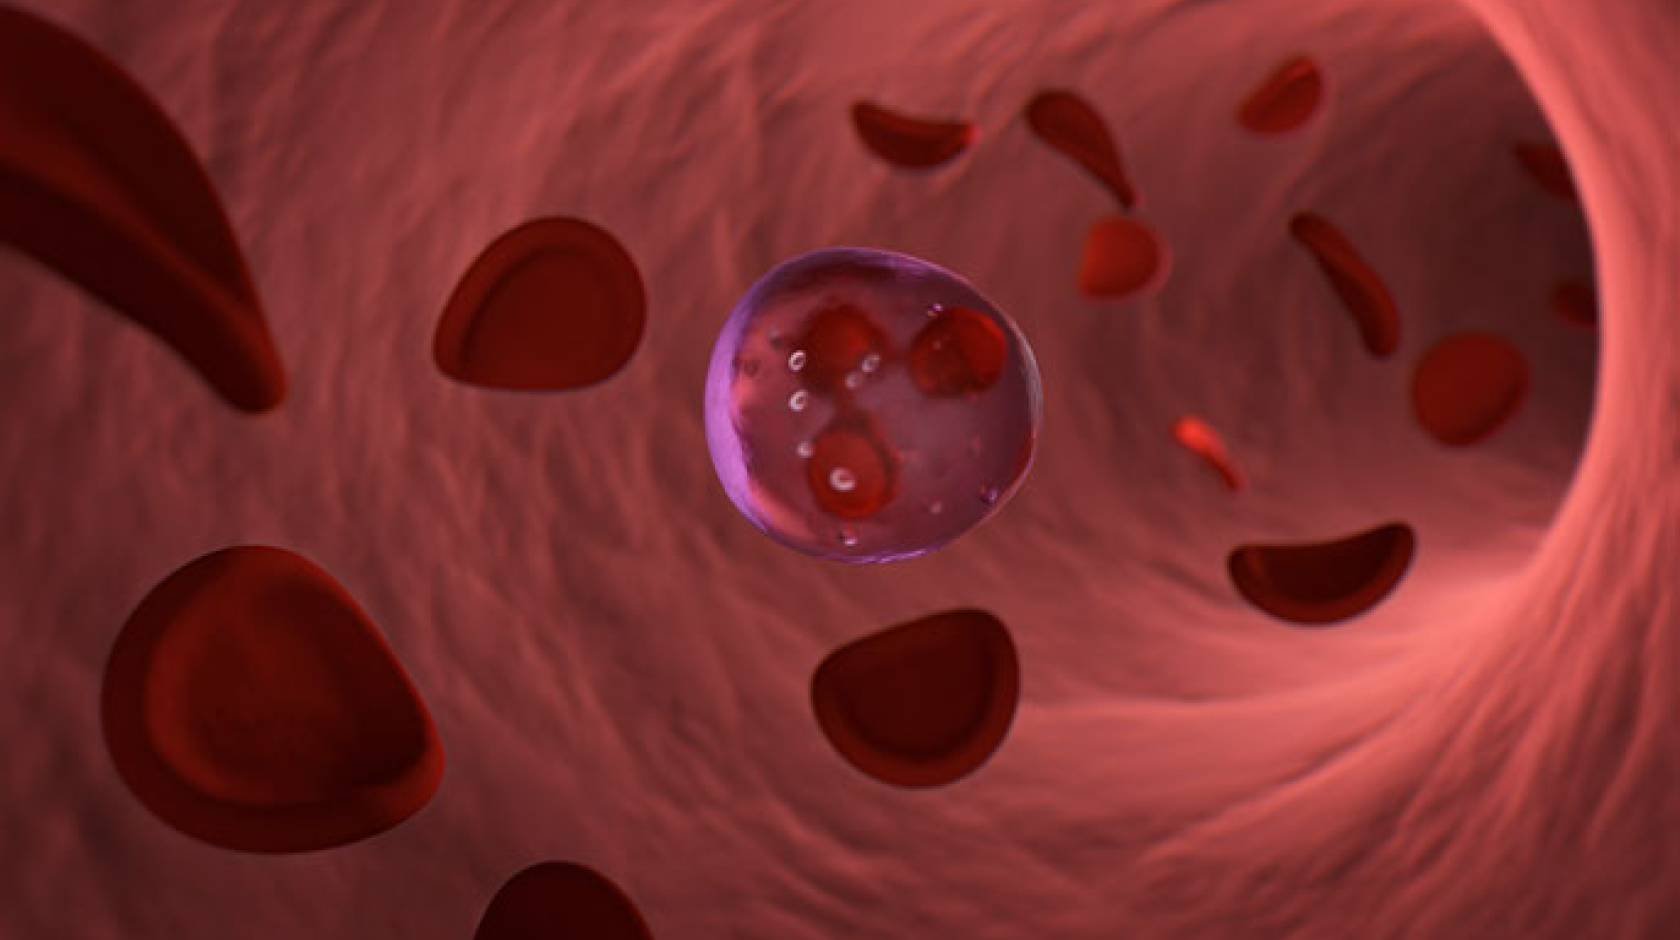 Blood cells floating in a vessel